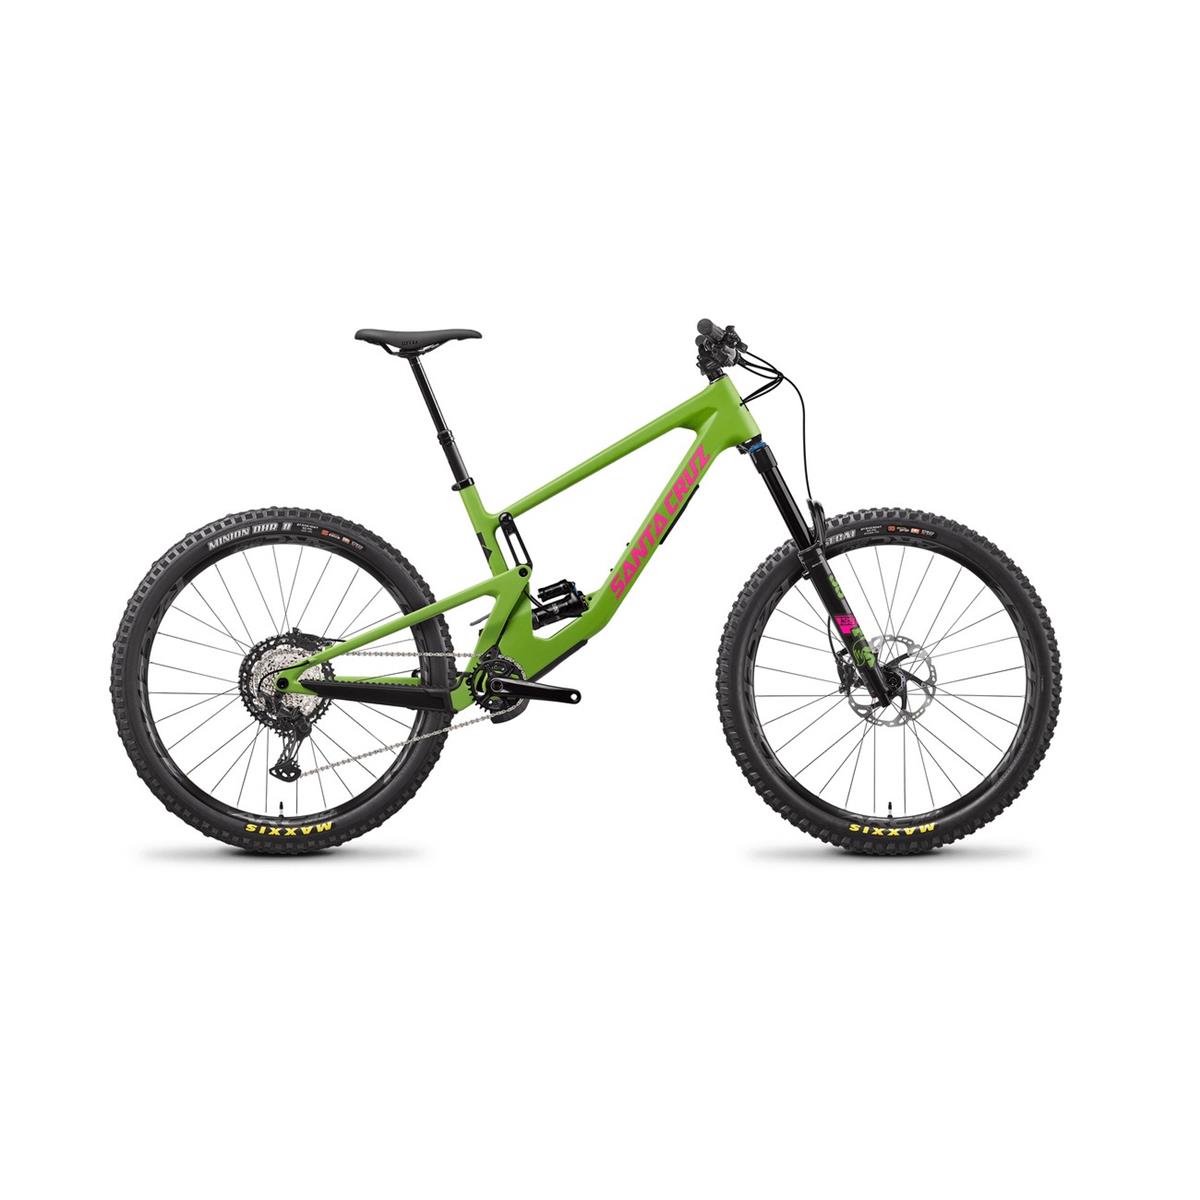 Nomad 5 C XT 27,5'' 170mm 12s Green Size S